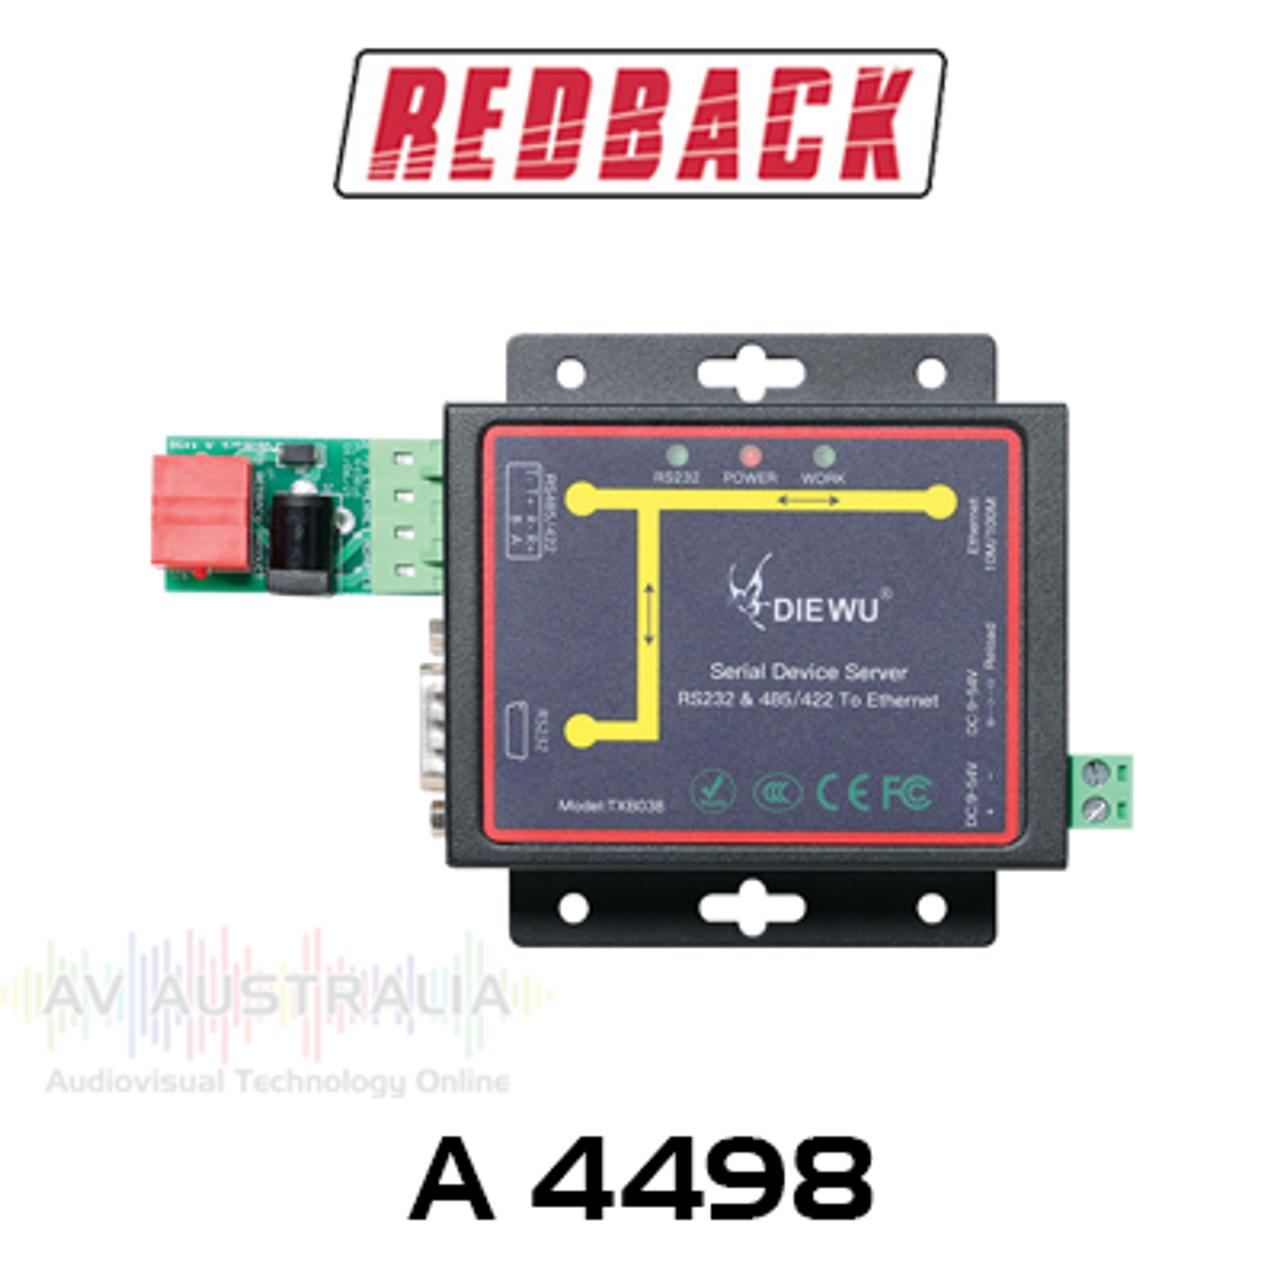 Redback Serial RS232/485/422 DB9 To Ethernet Connection Pack